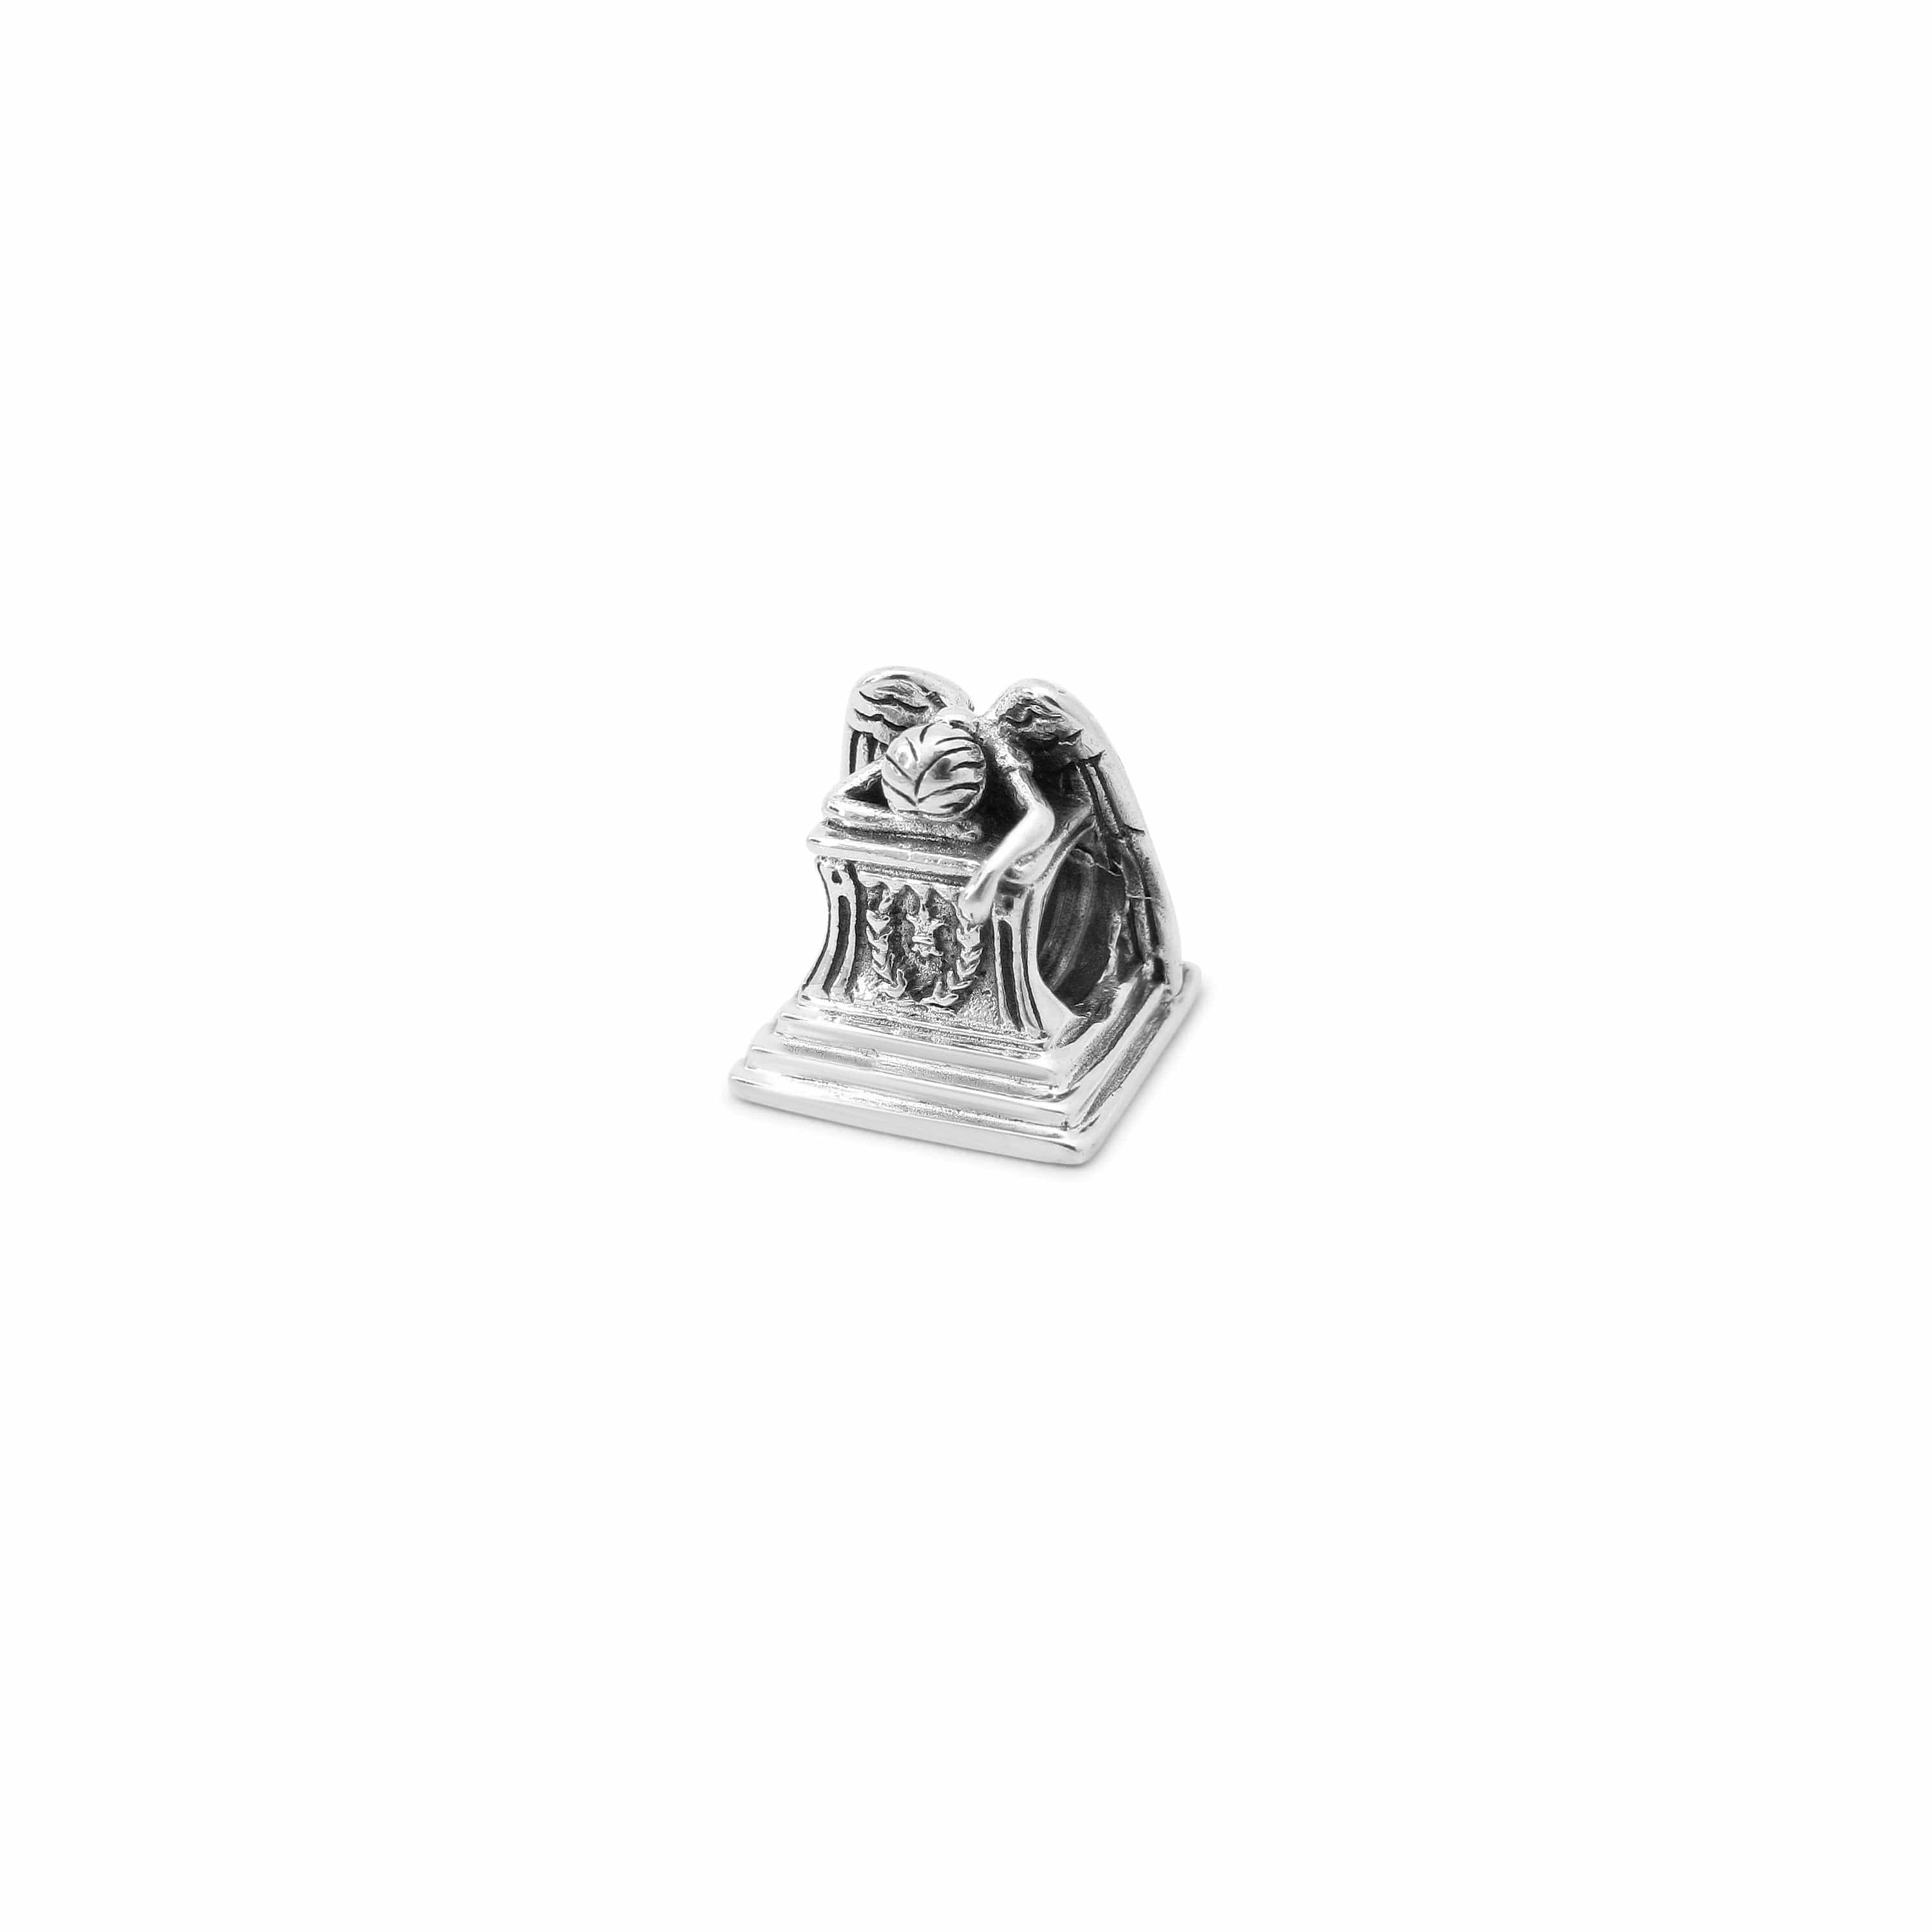 Cristy Cali Cristy Cali Angel of Grief Charm - Little Miss Muffin Children & Home